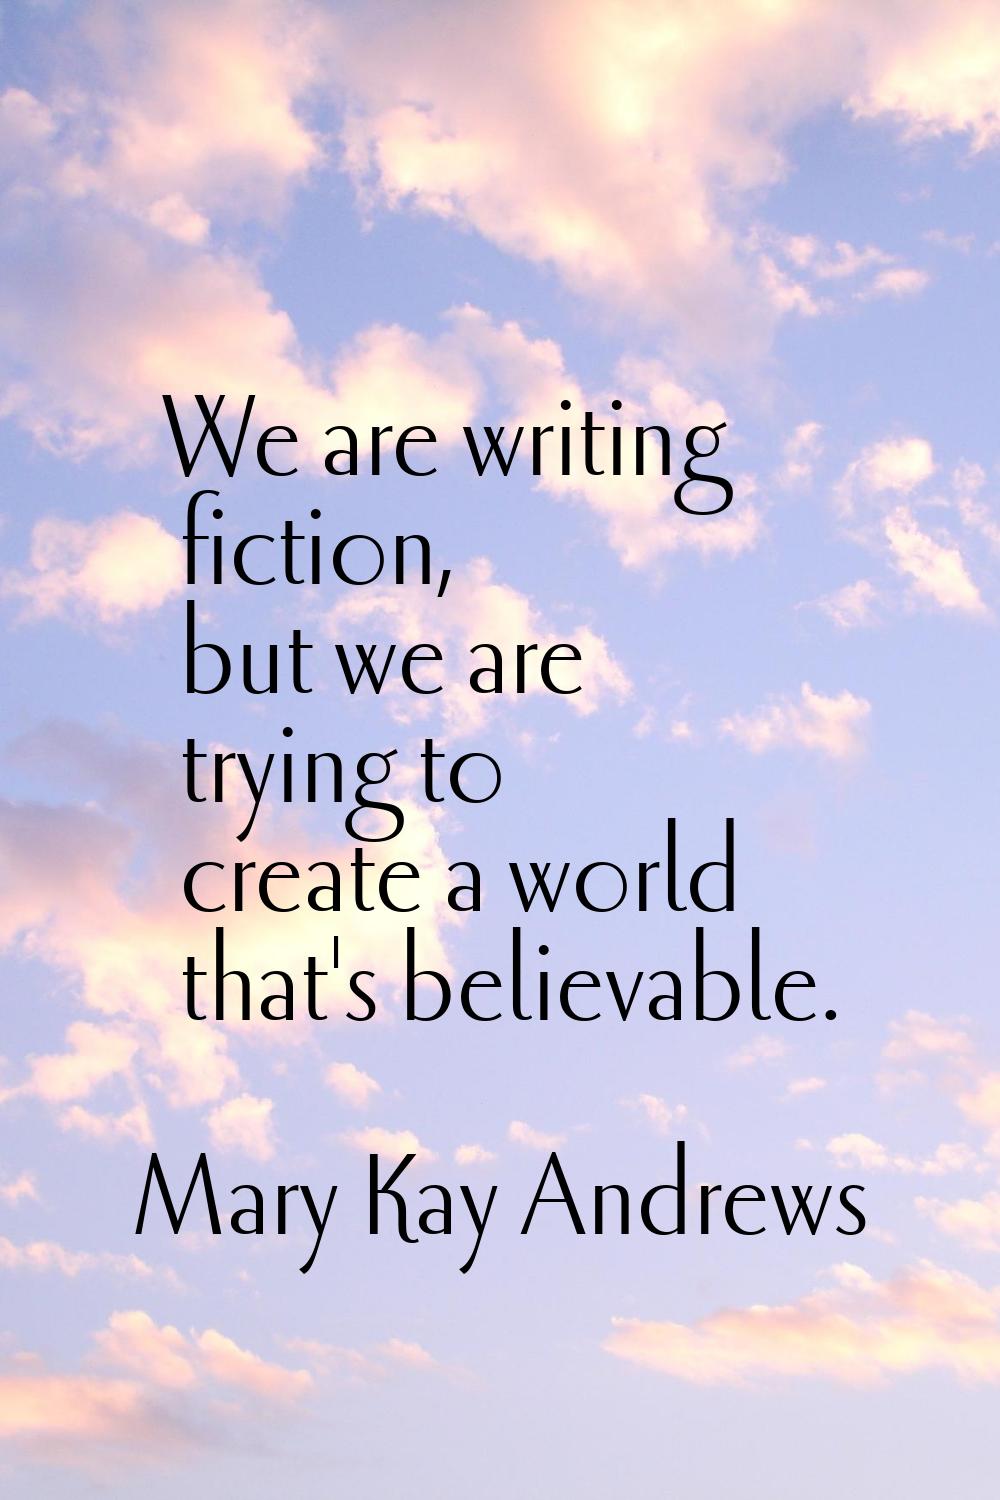 We are writing fiction, but we are trying to create a world that's believable.